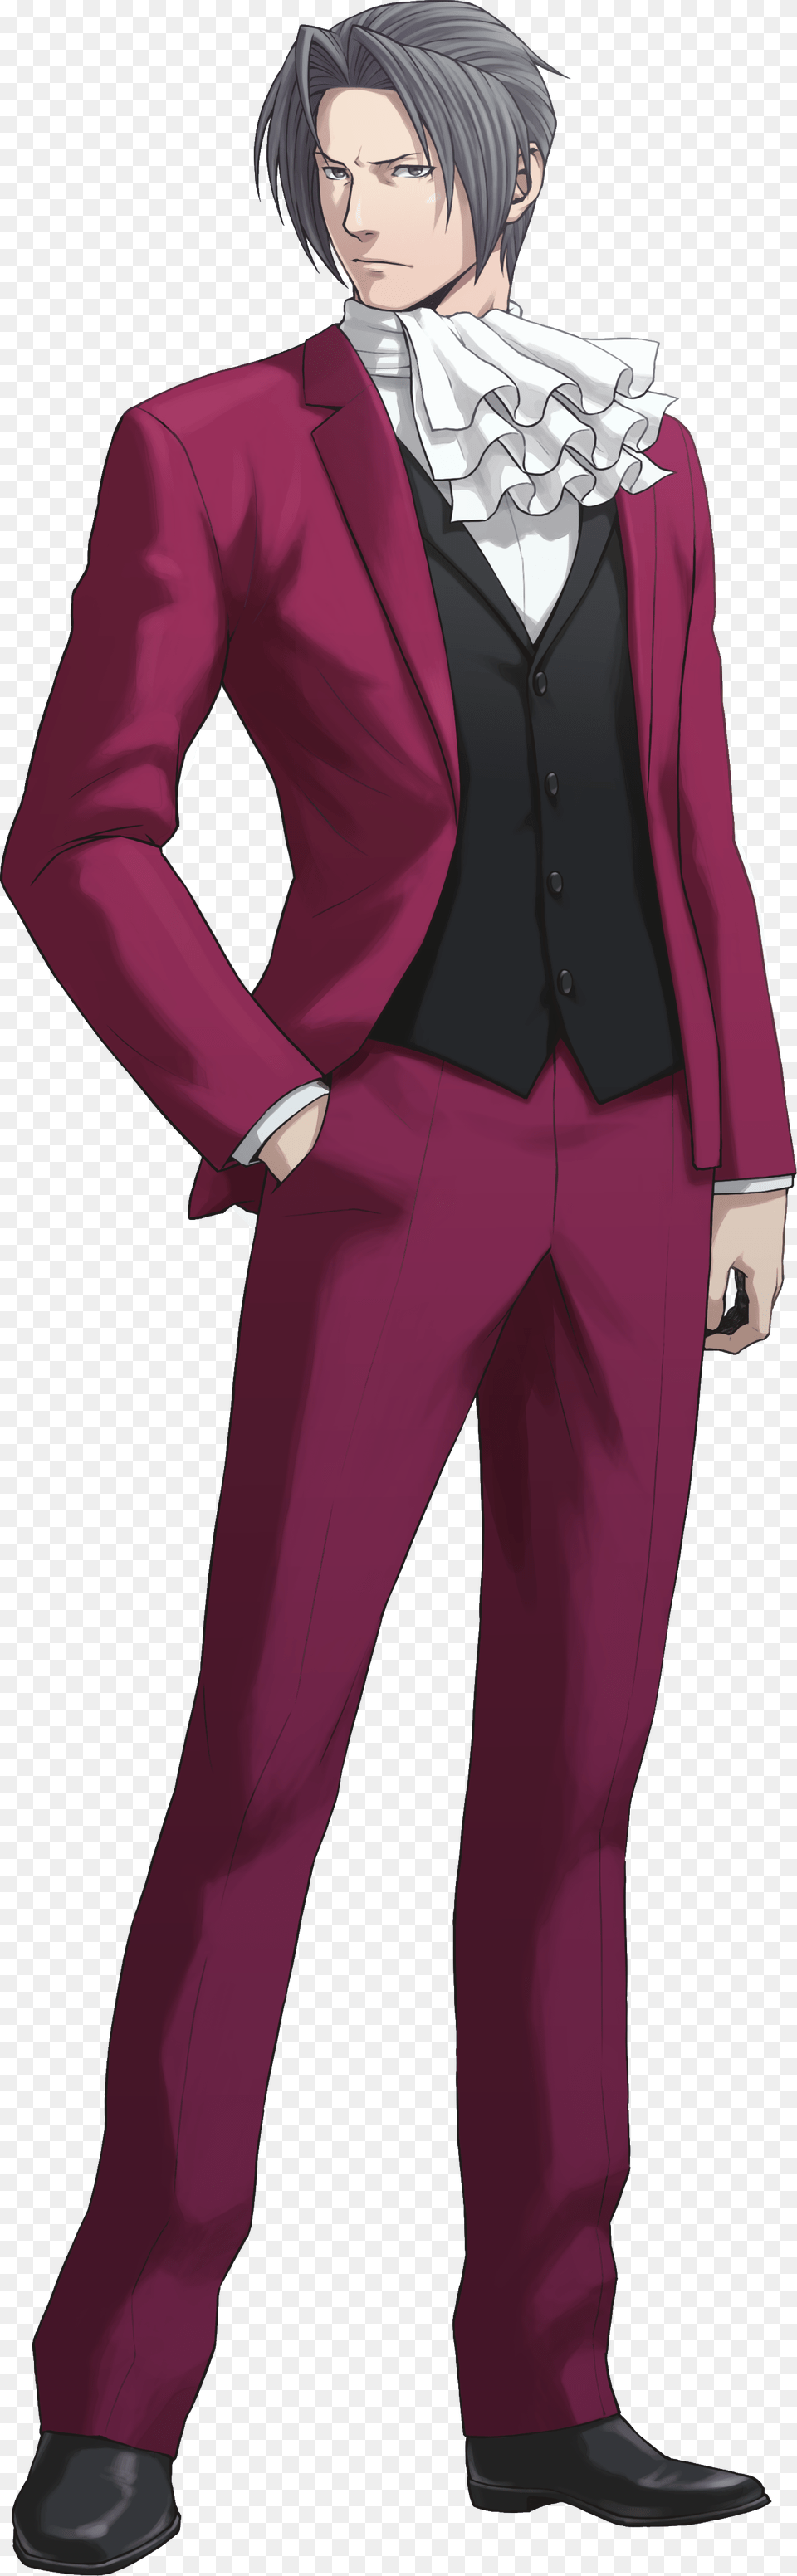 User Based Personality Rp Wikia Ace Attorney Miles Edgeworth, Tuxedo, Book, Clothing, Suit Free Png Download